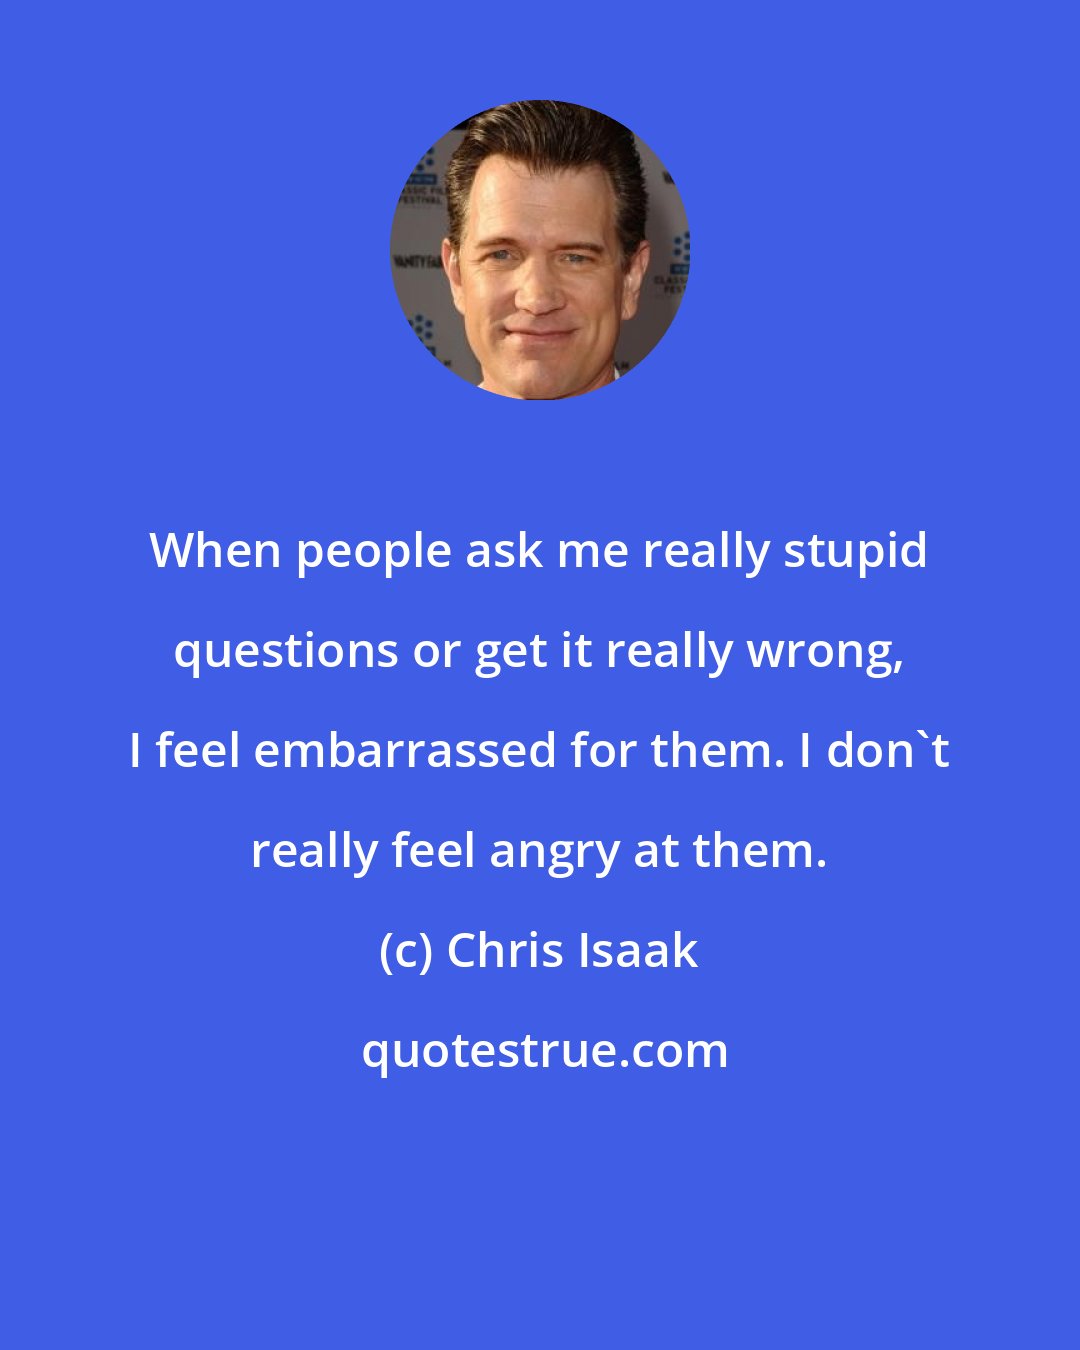 Chris Isaak: When people ask me really stupid questions or get it really wrong, I feel embarrassed for them. I don't really feel angry at them.